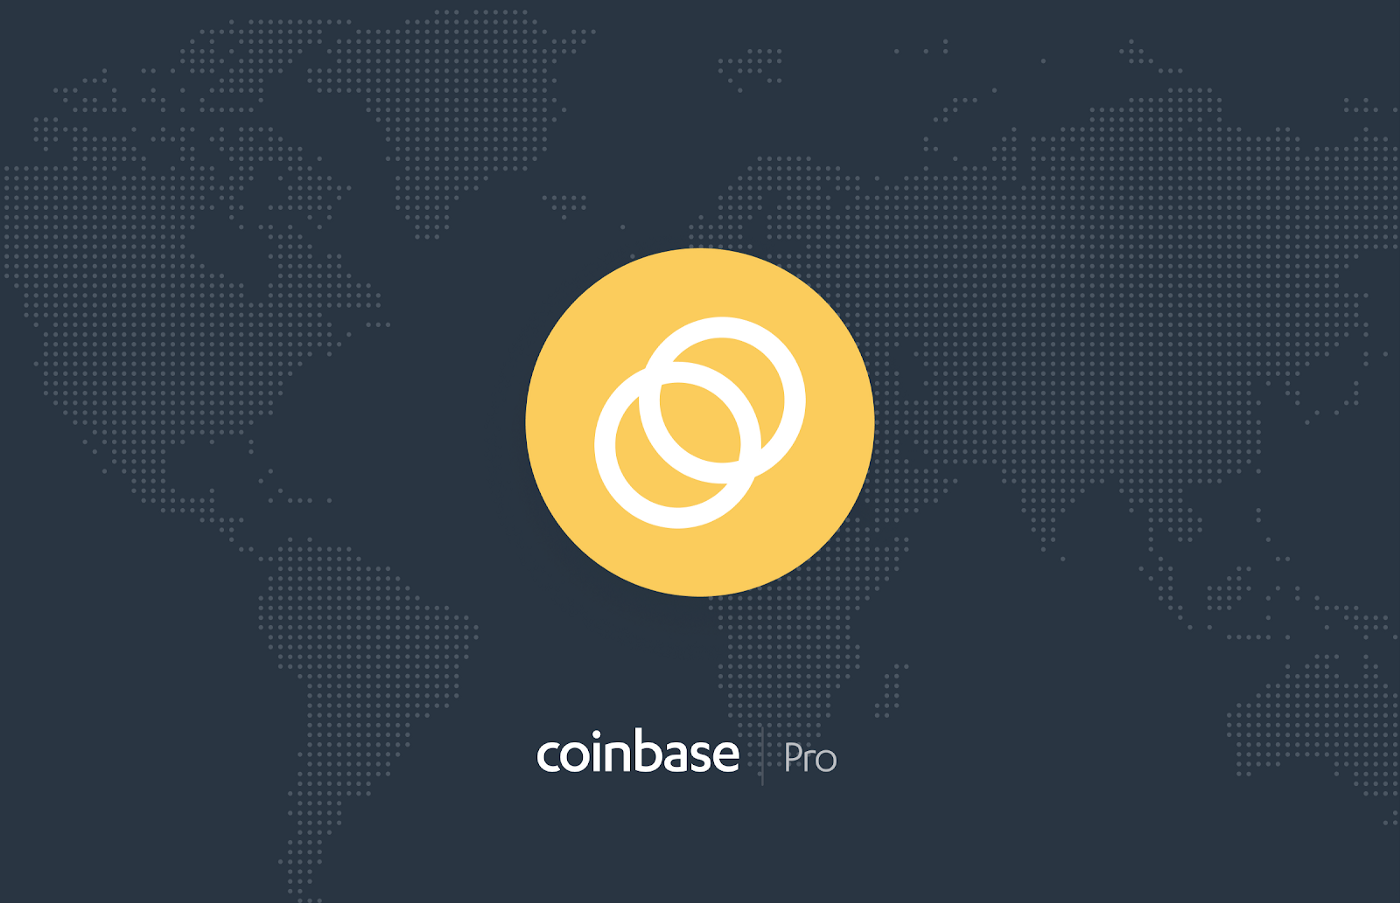 Celo is launching on Coinbase Pro